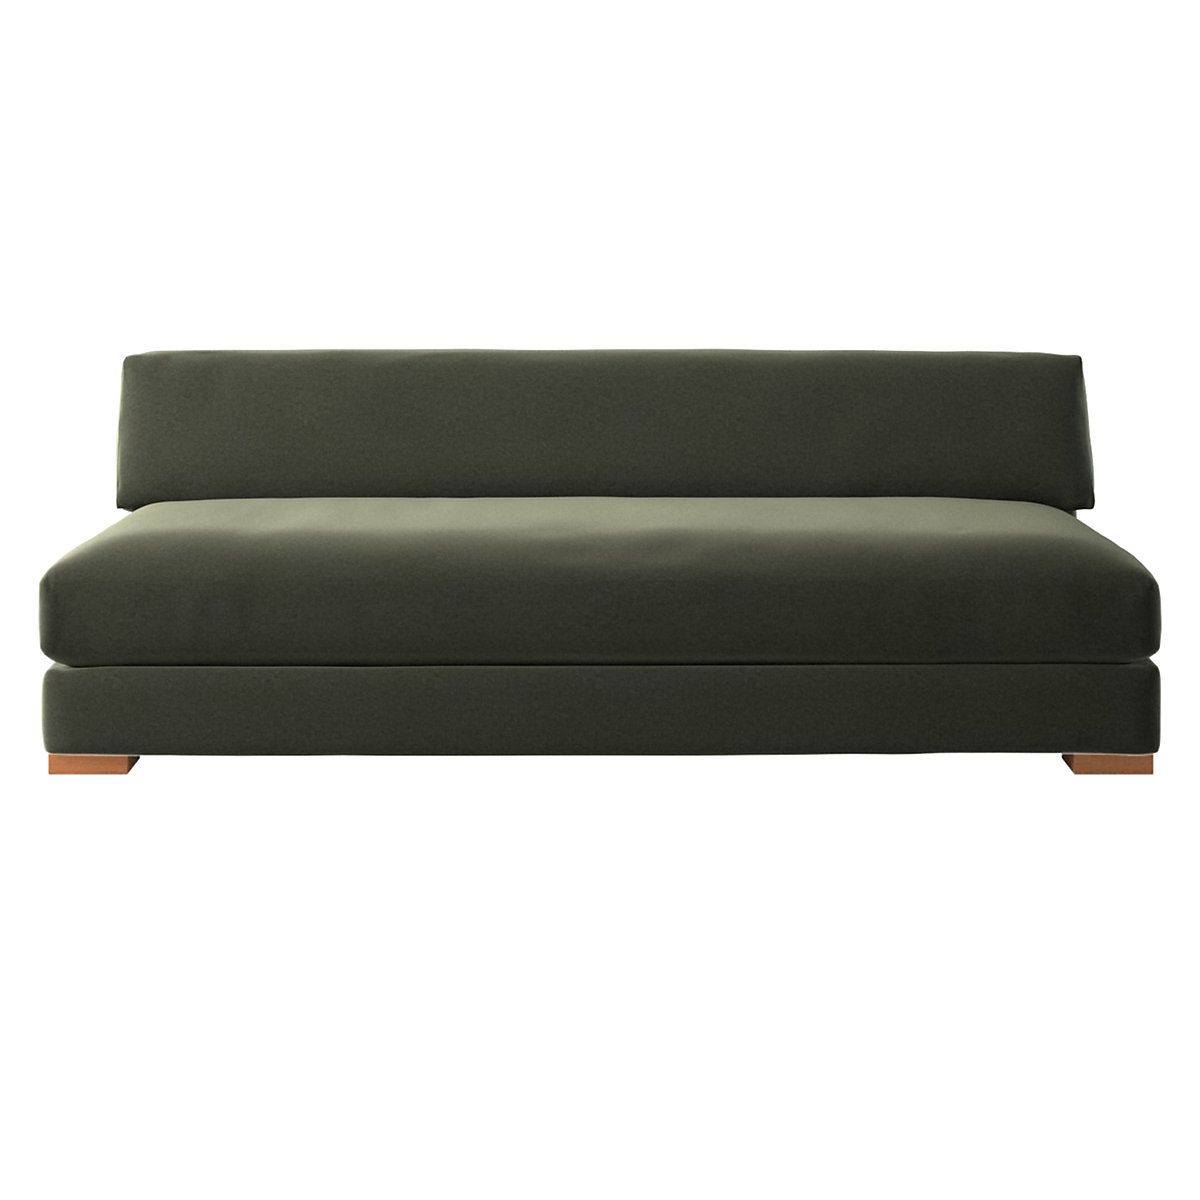 Piazza Sofa + Reviews | Cb2 With Camila Poly Blend Sectional Sofas Off White (View 15 of 15)